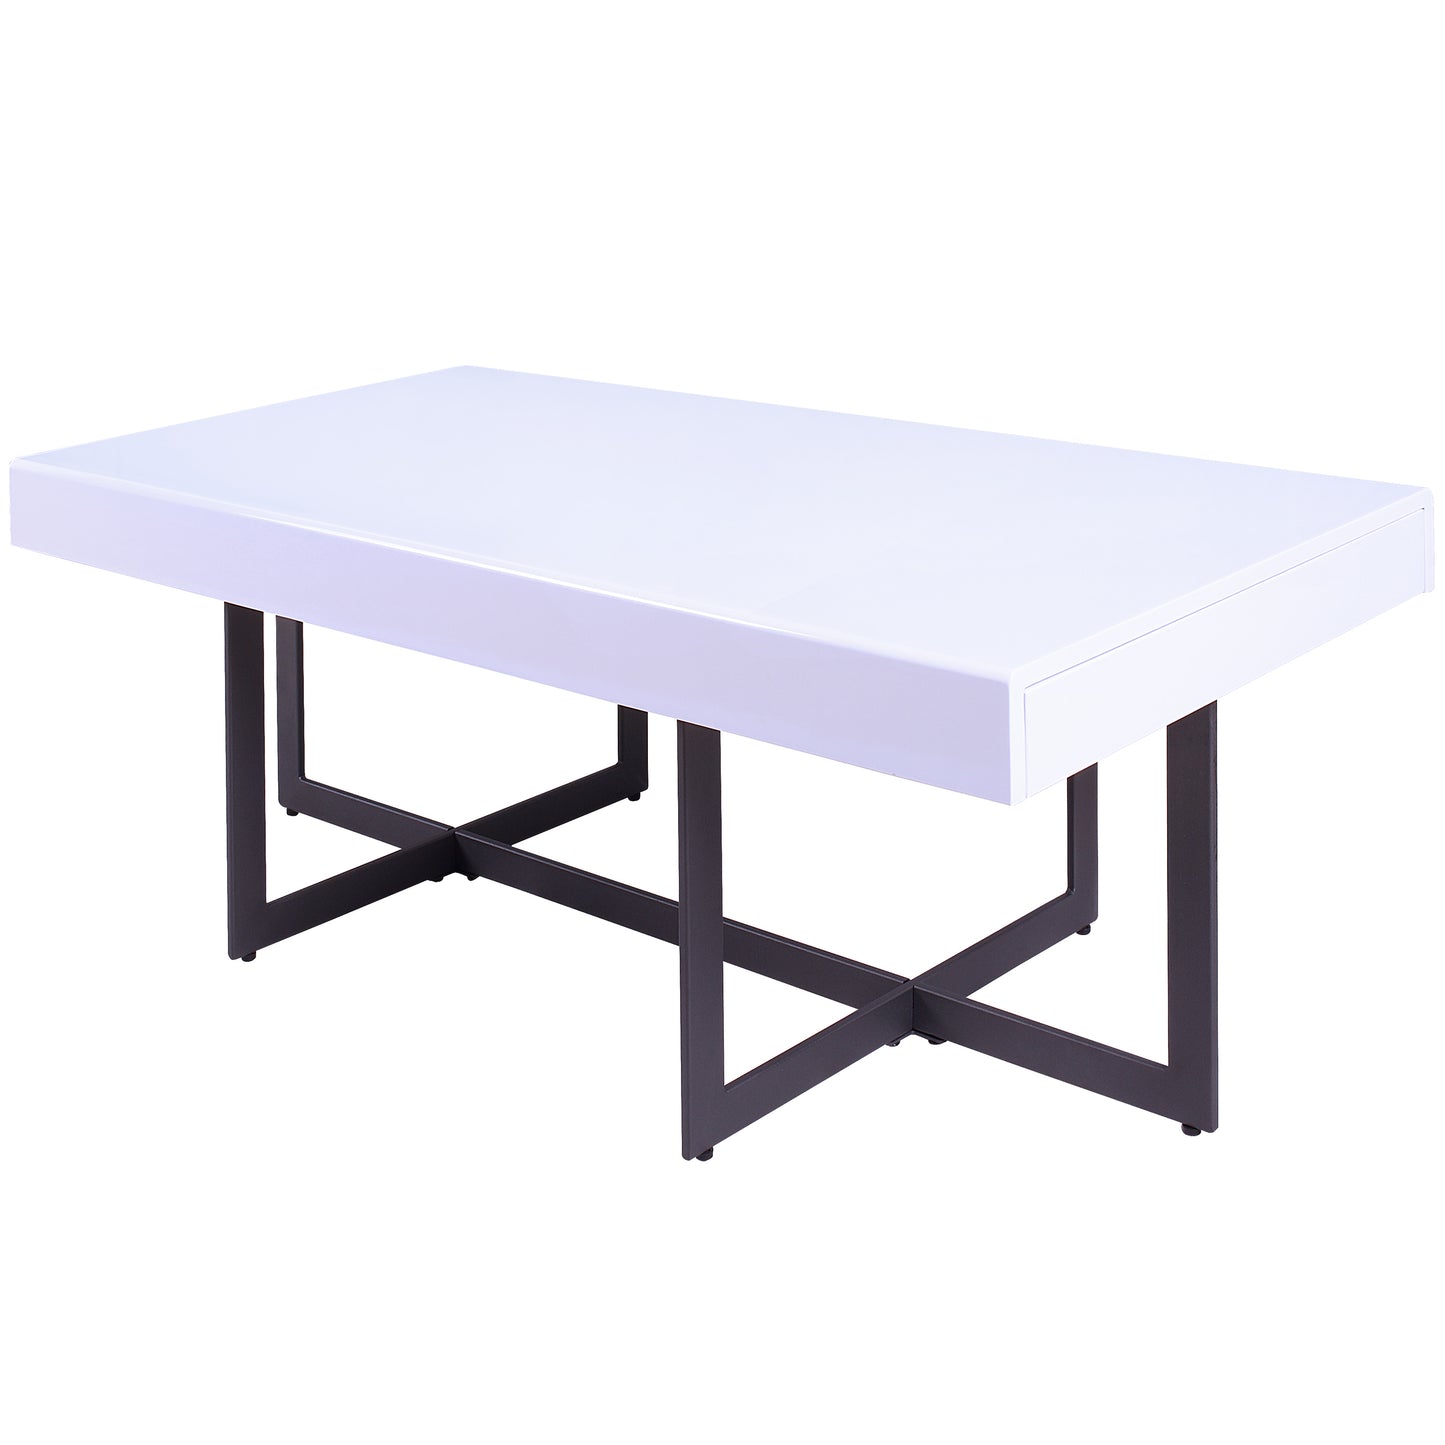 Left angled coffee table only from a two-piece modern white high gloss and gunmetal storage coffee table set with hidden drawers on a white background